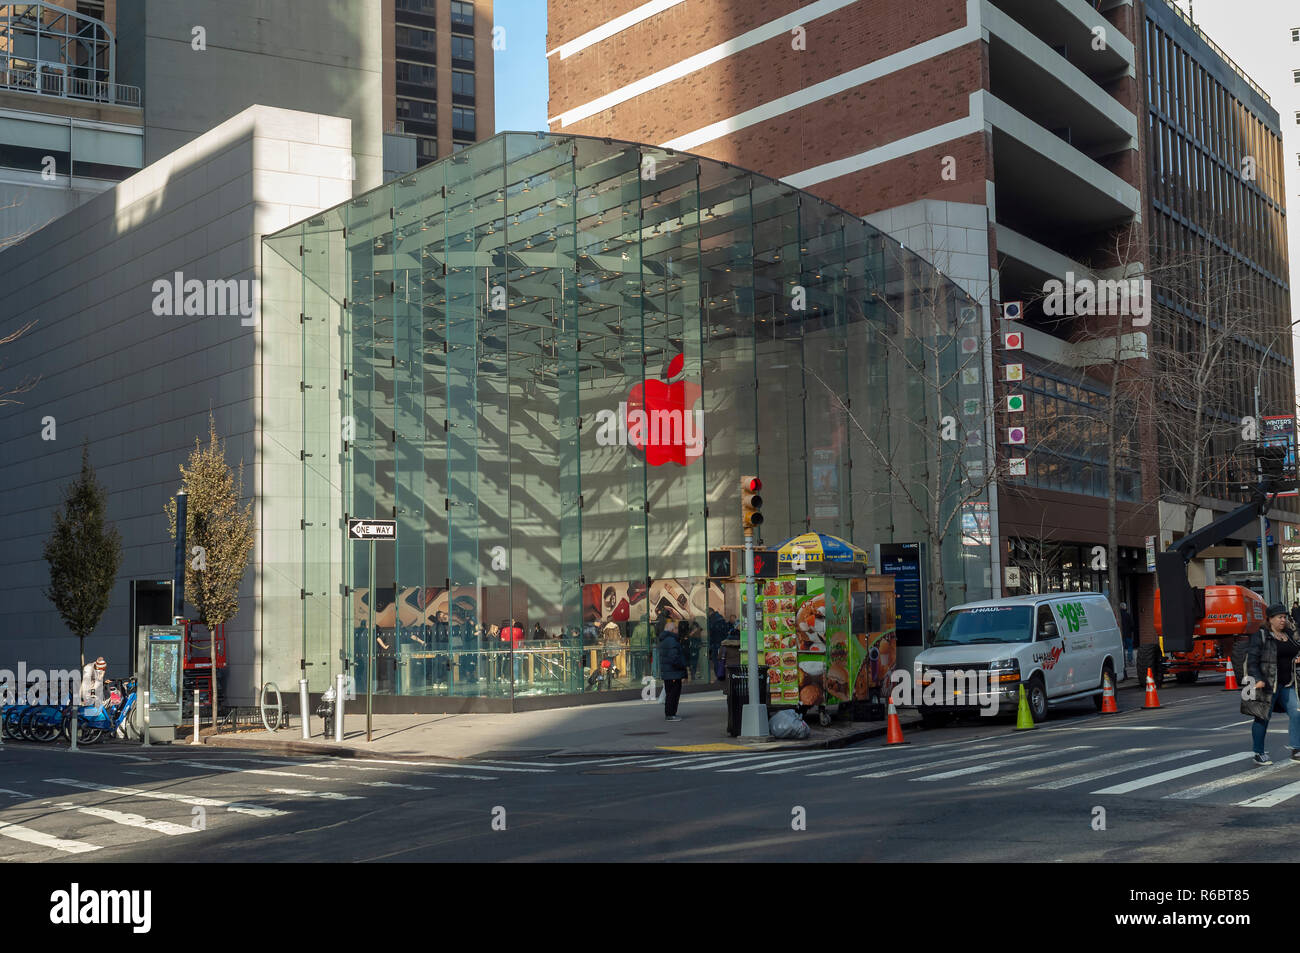 The Apple store in the Upper West Side neighborhood in New York displays its illuminated logo in (RED) marking World AIDS Day on Saturday, December 1, 2018. Apple will donate $1 for every transaction made with Apple Pay company wide to the Global Fund. 400 Apple stores have decorated their logo in (RED). (Â© Richard B. Levine) Stock Photo